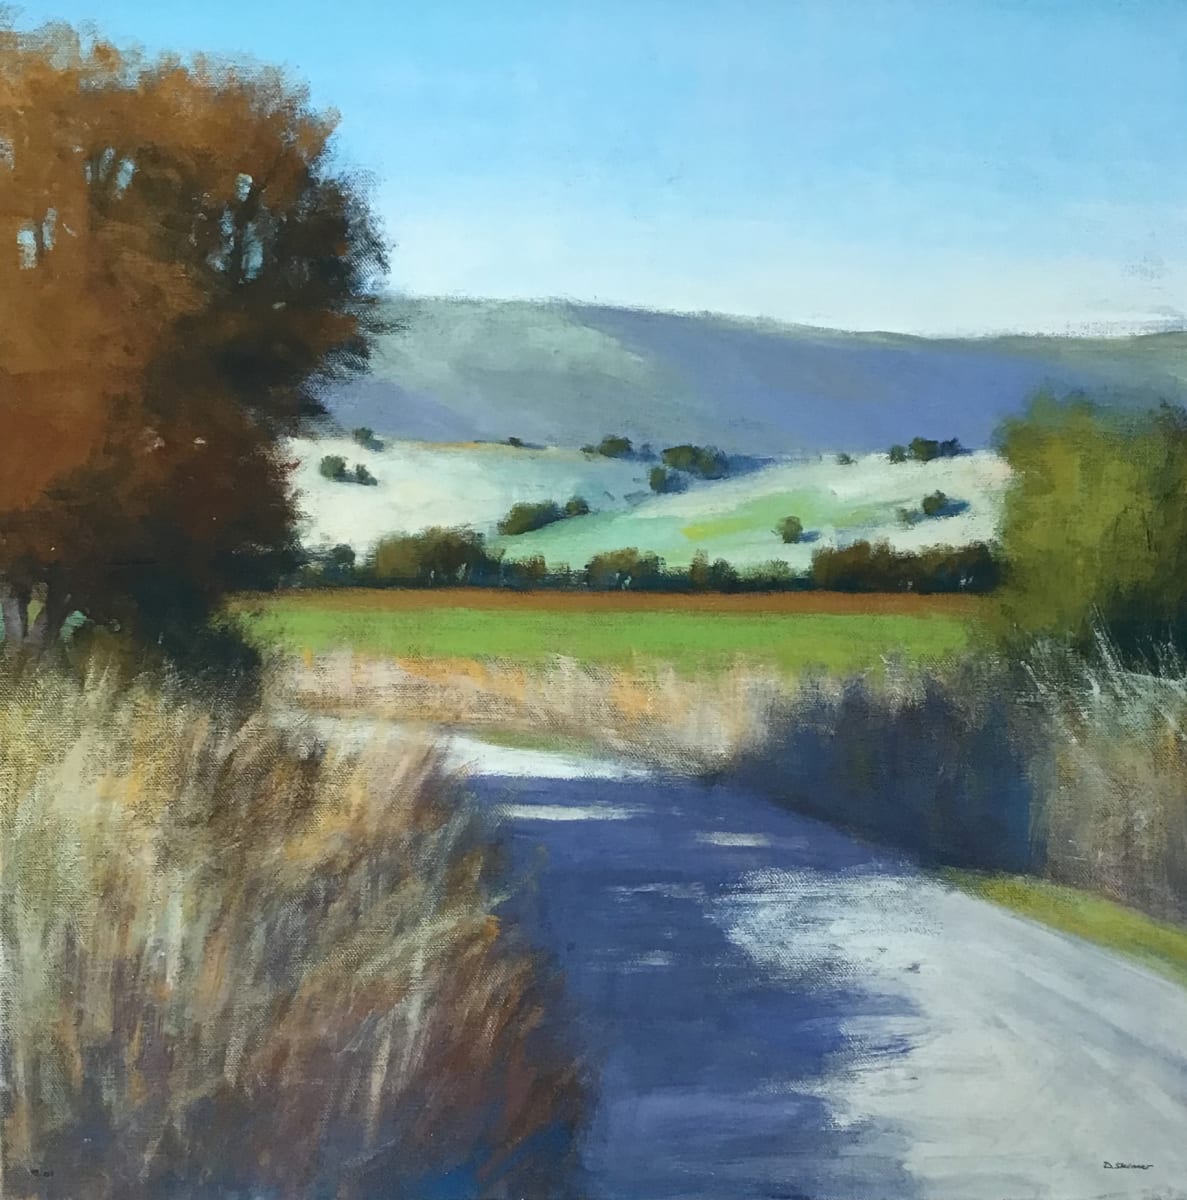 Foothill Road by David Skinner  Image: Foothill Road